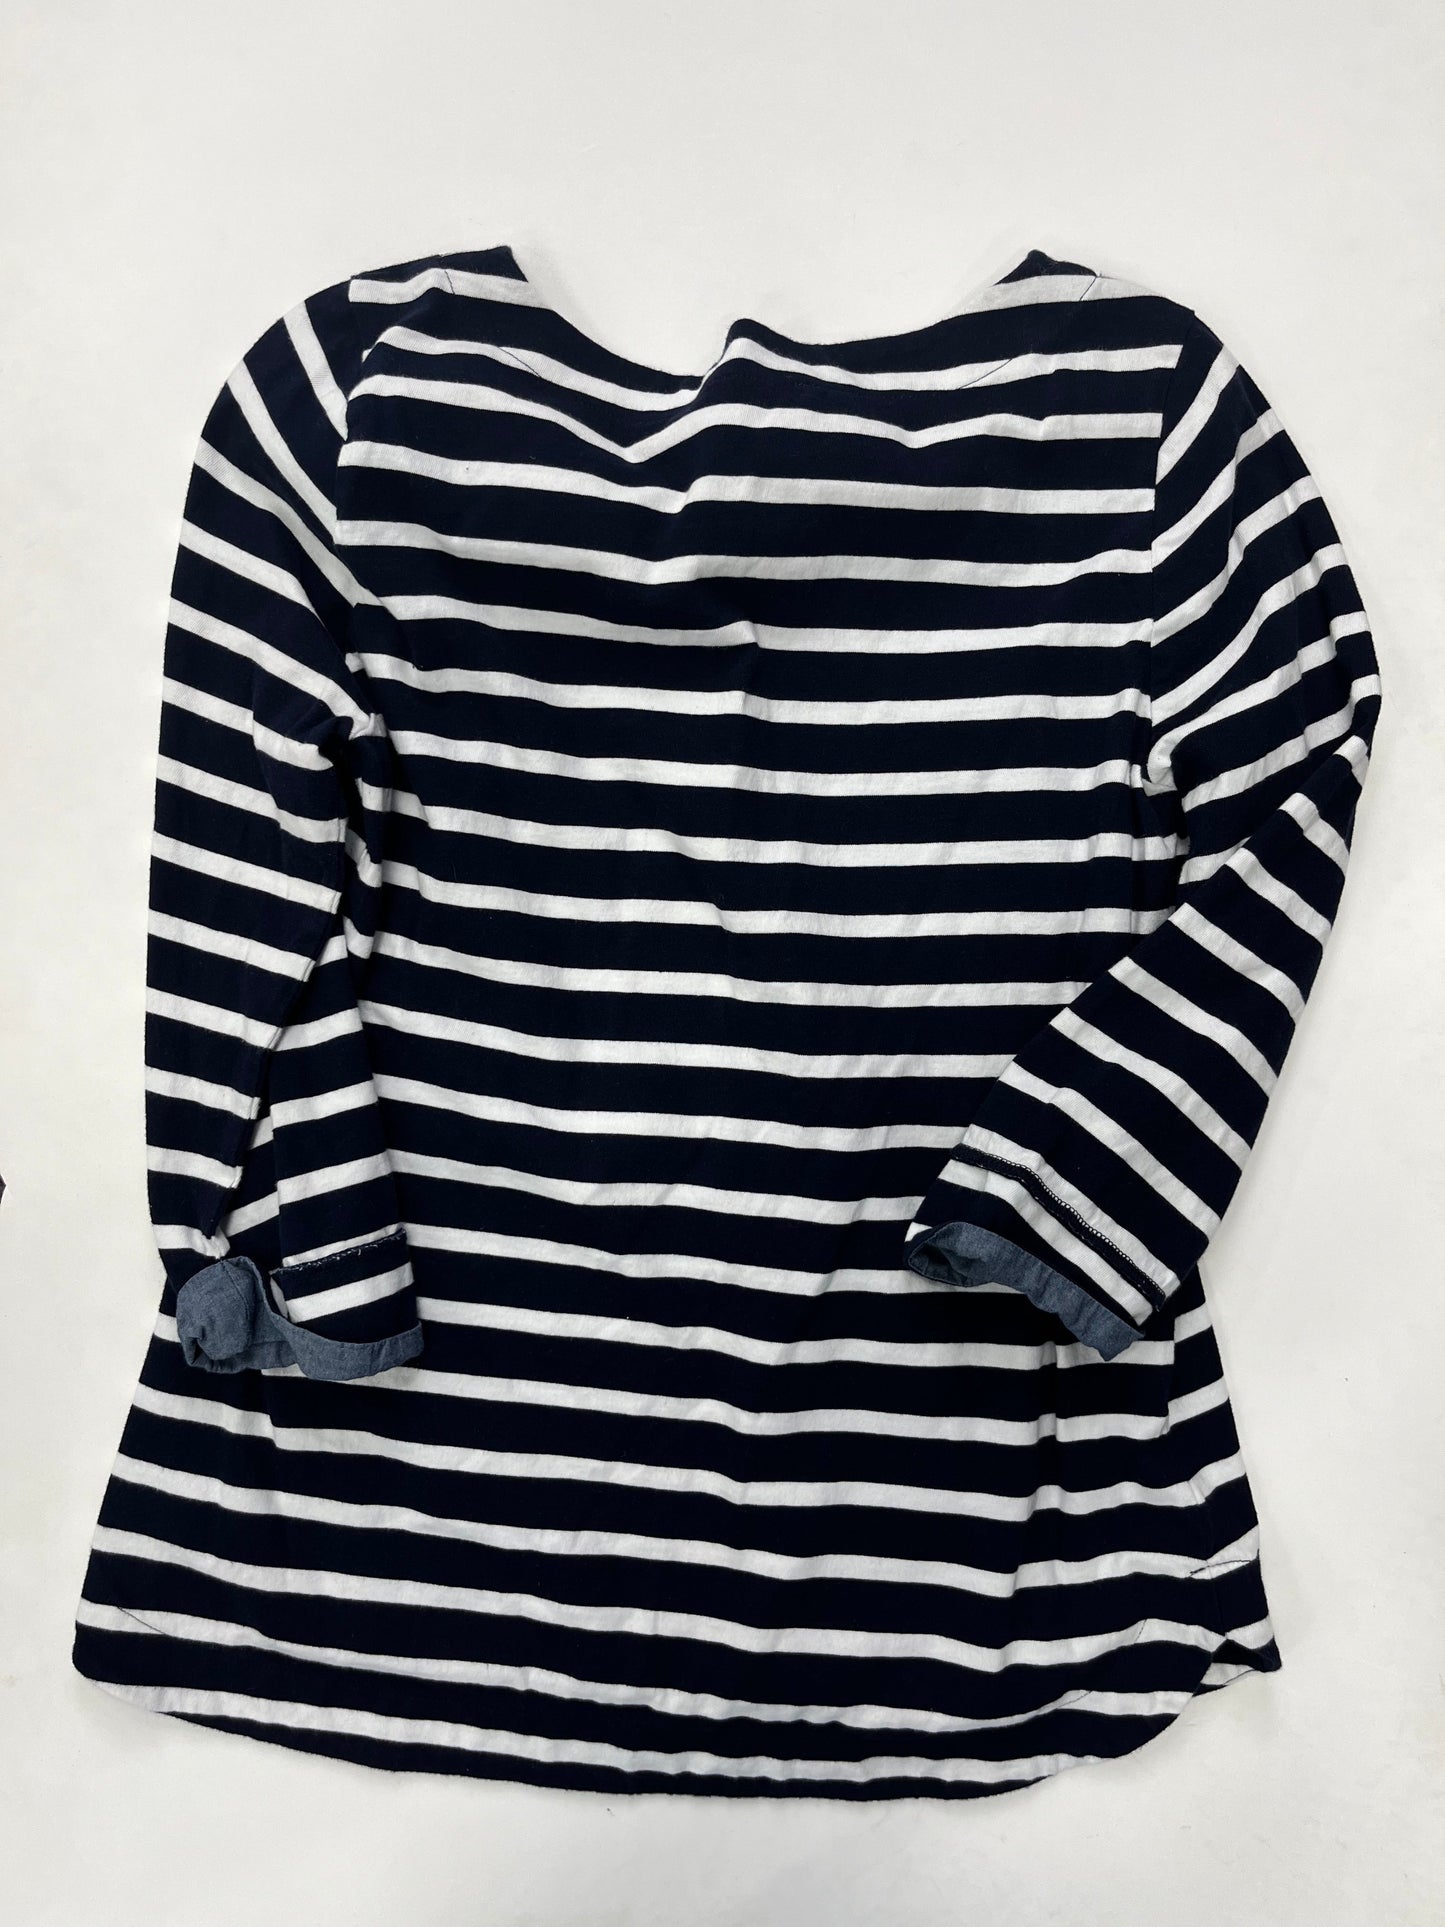 Striped Top Long Sleeve Talbots O, Size M